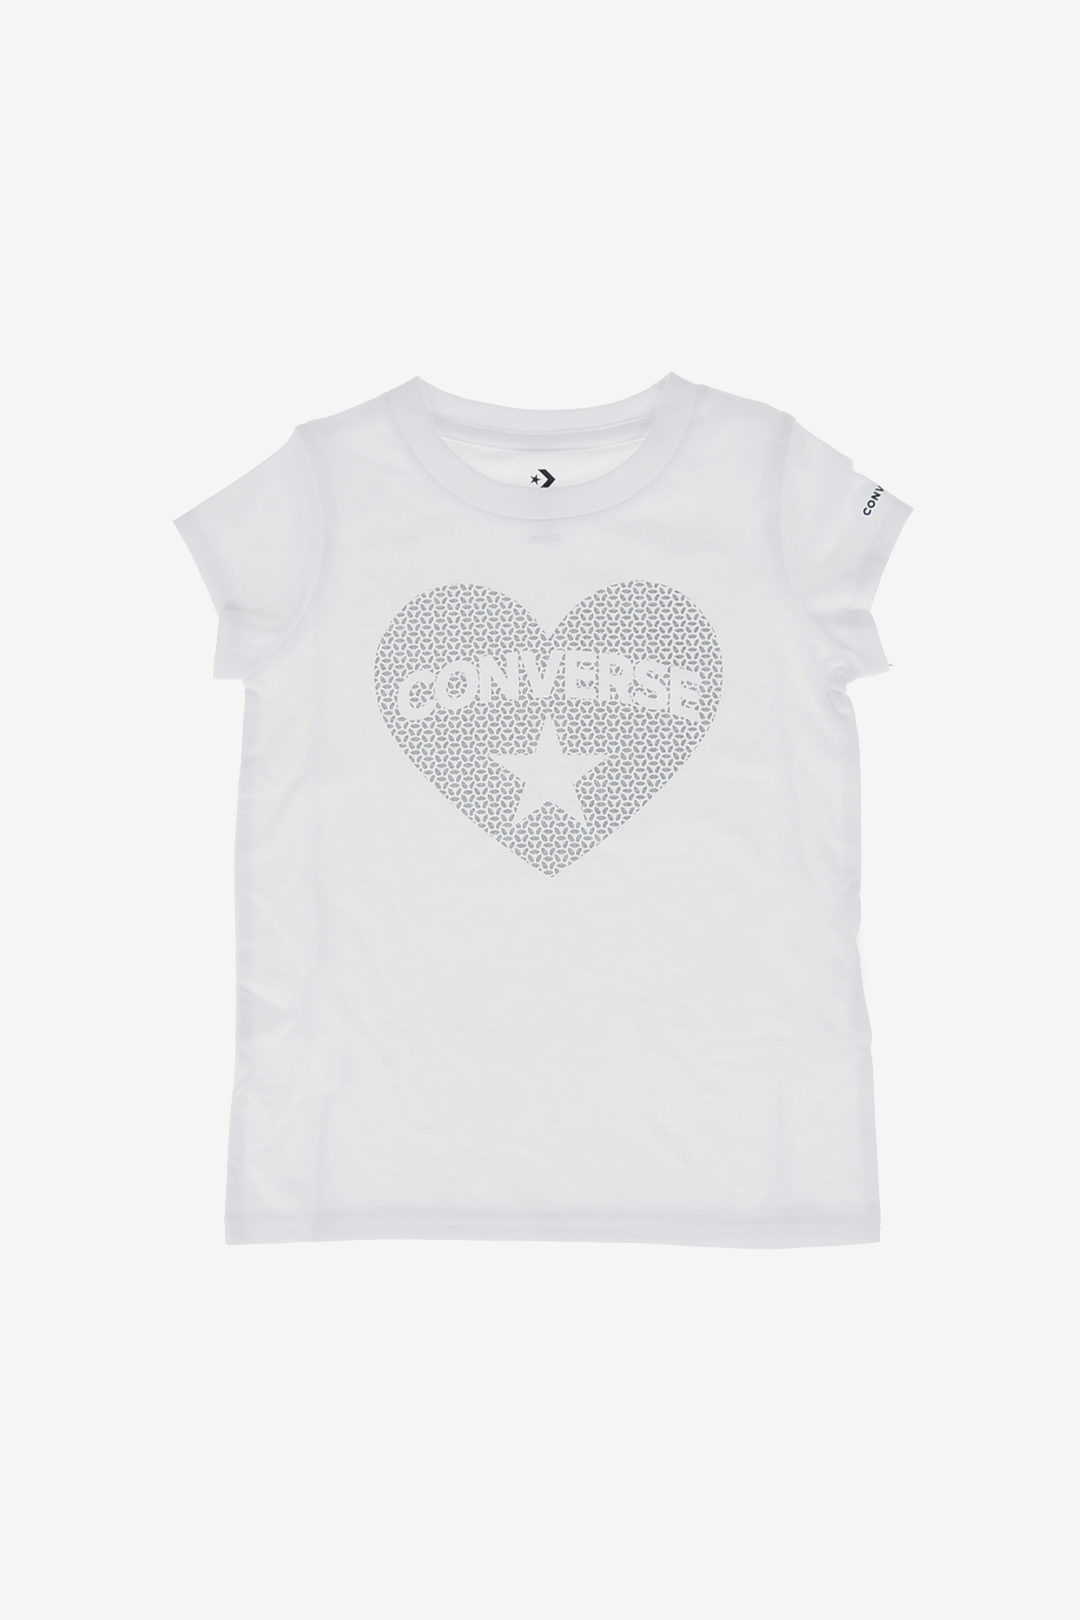 converse with heart shirt